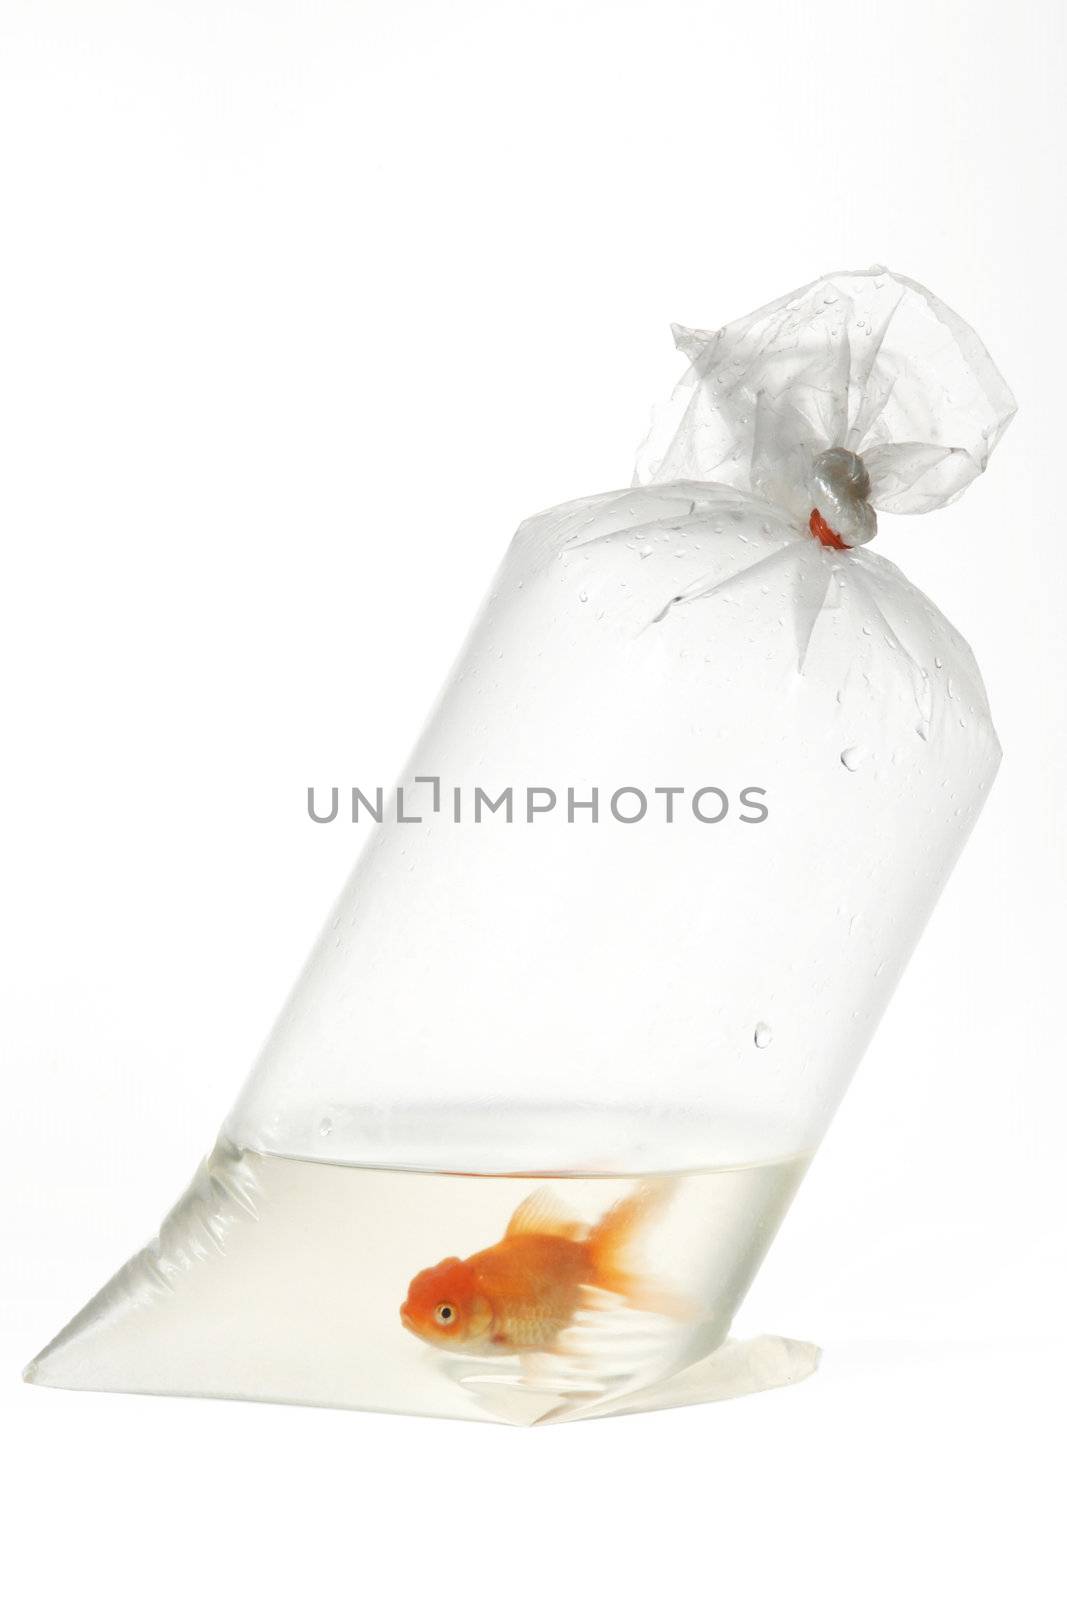 An image of golden fish in plastic package